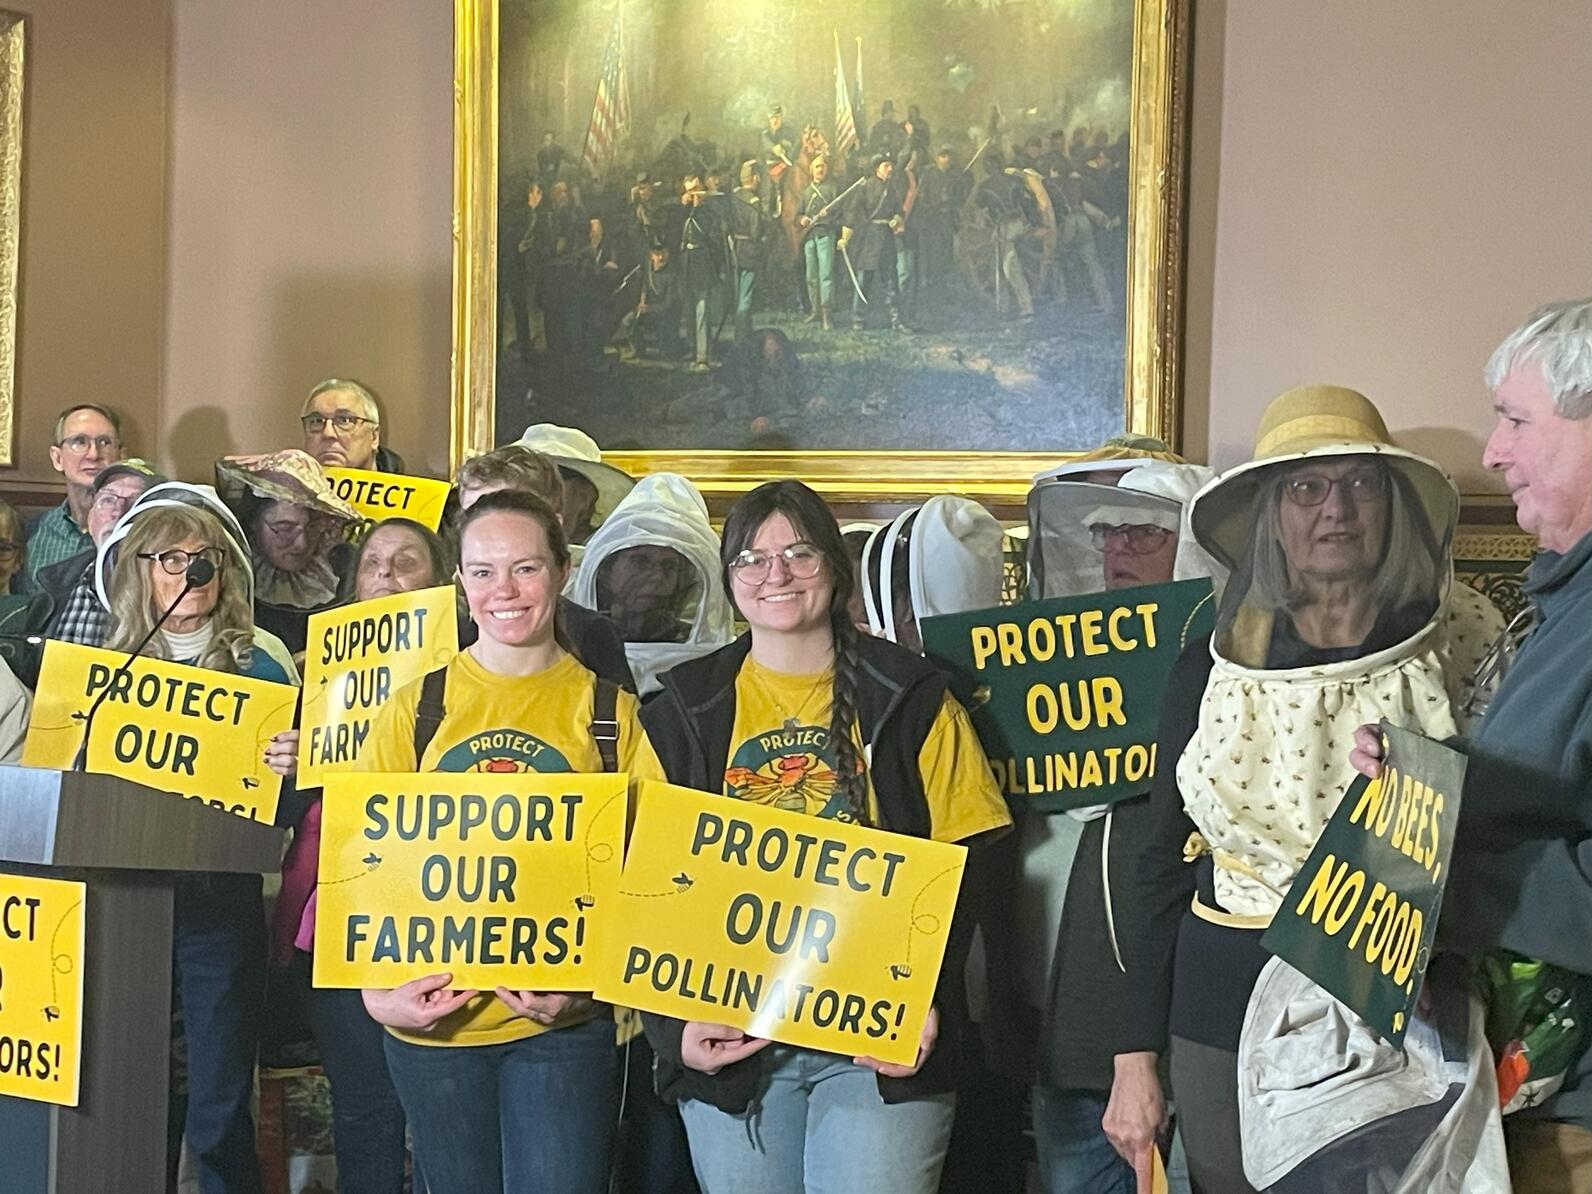 Women holding protect our pollinators and farms signs